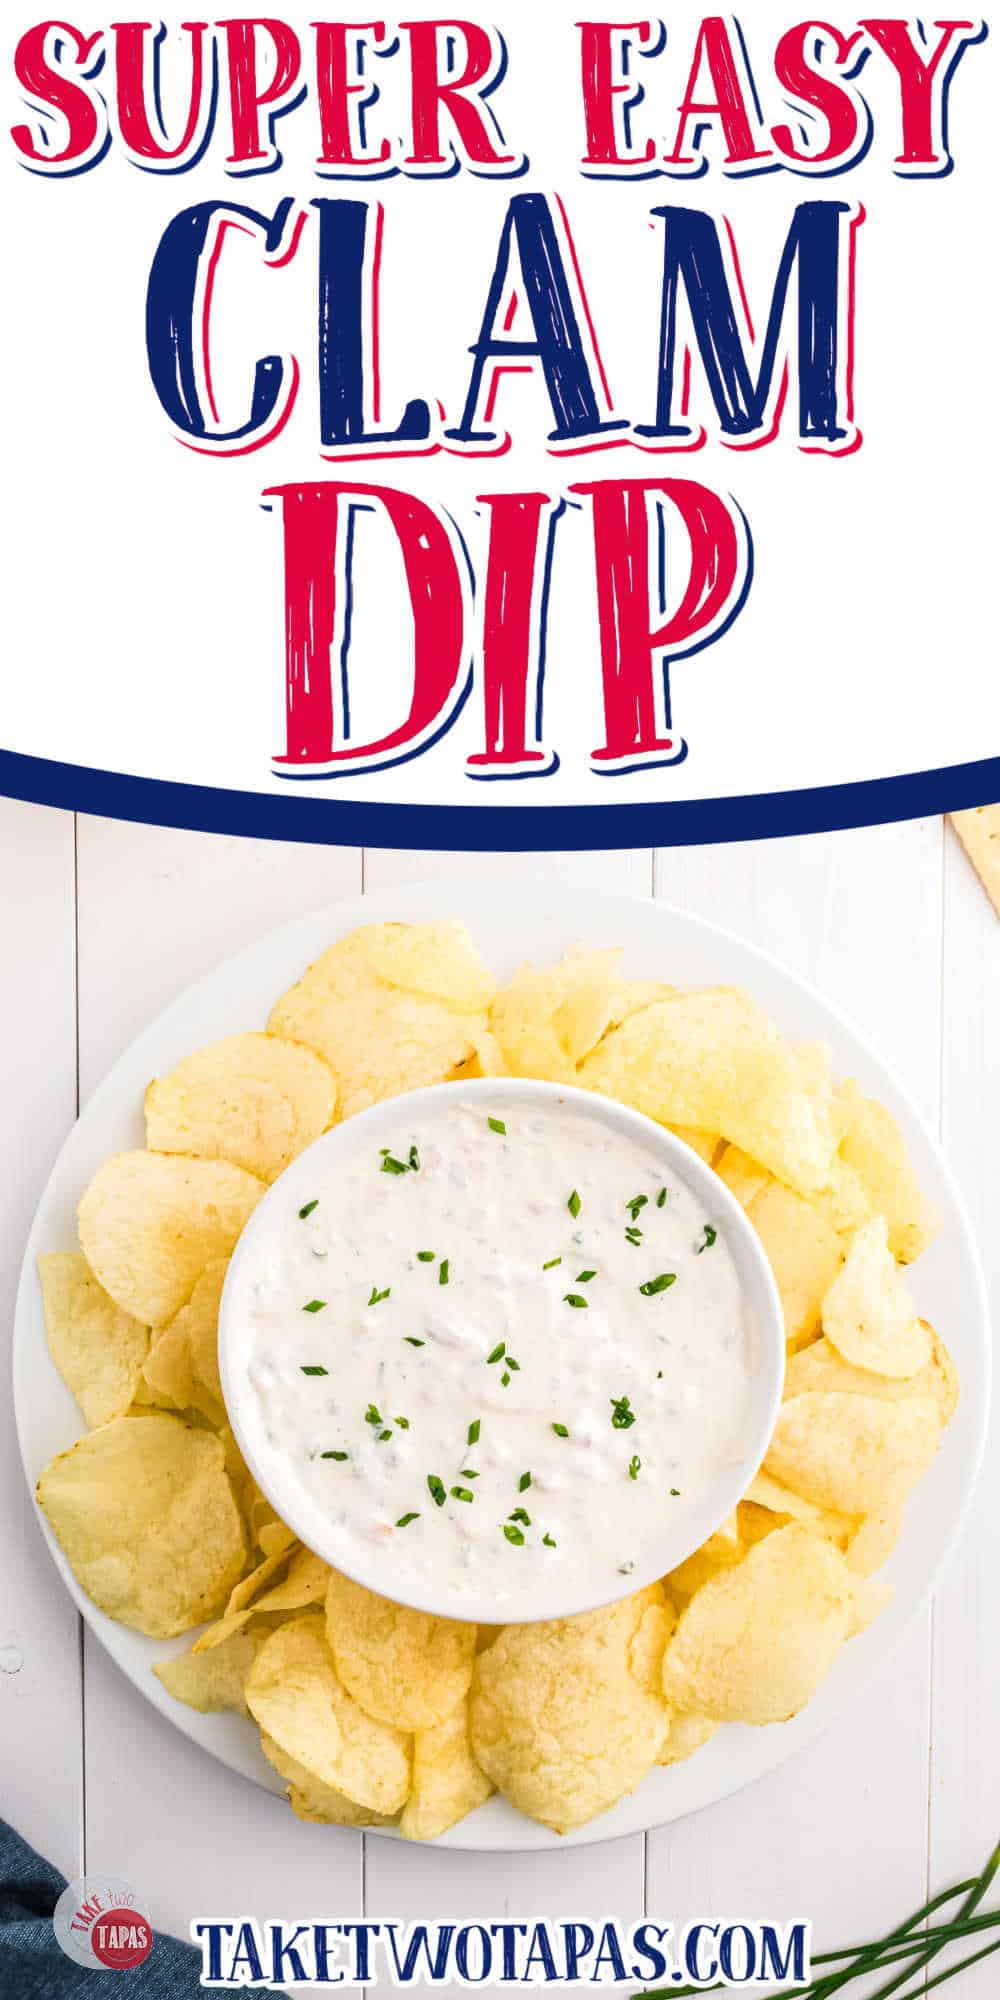 bowl of dip with chips and text "super easy clam dip"